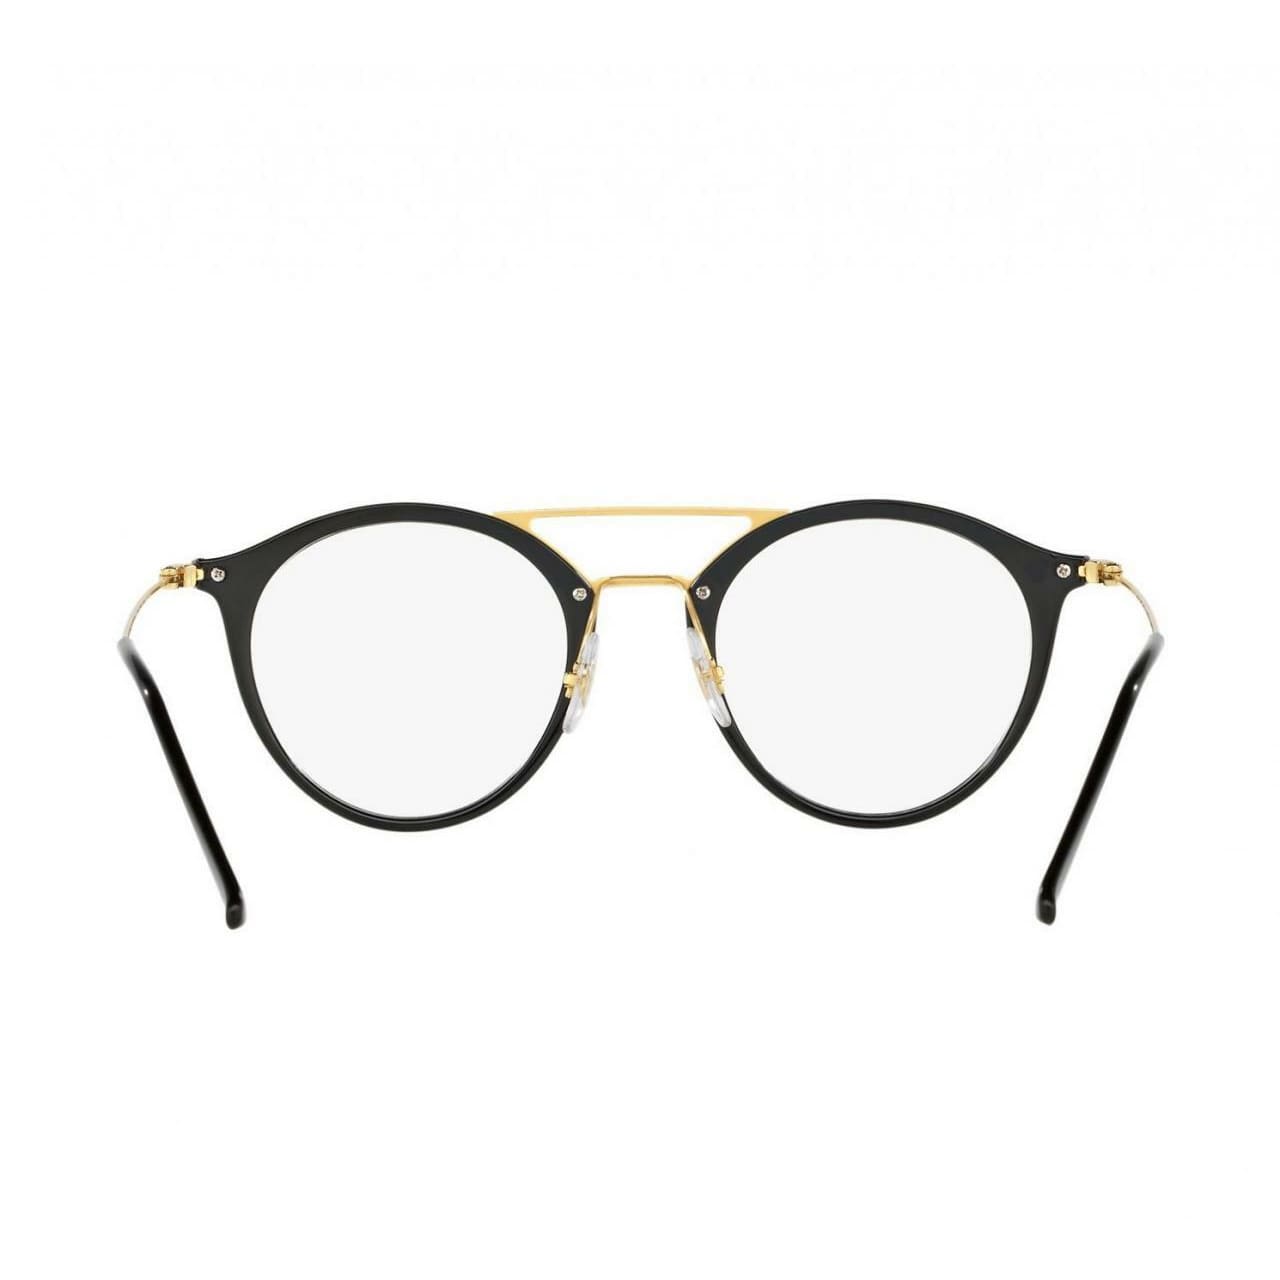 Ray-Ban RB7097-2000 Black Gold Round Injected Eyeglasses Frames 8053672603613